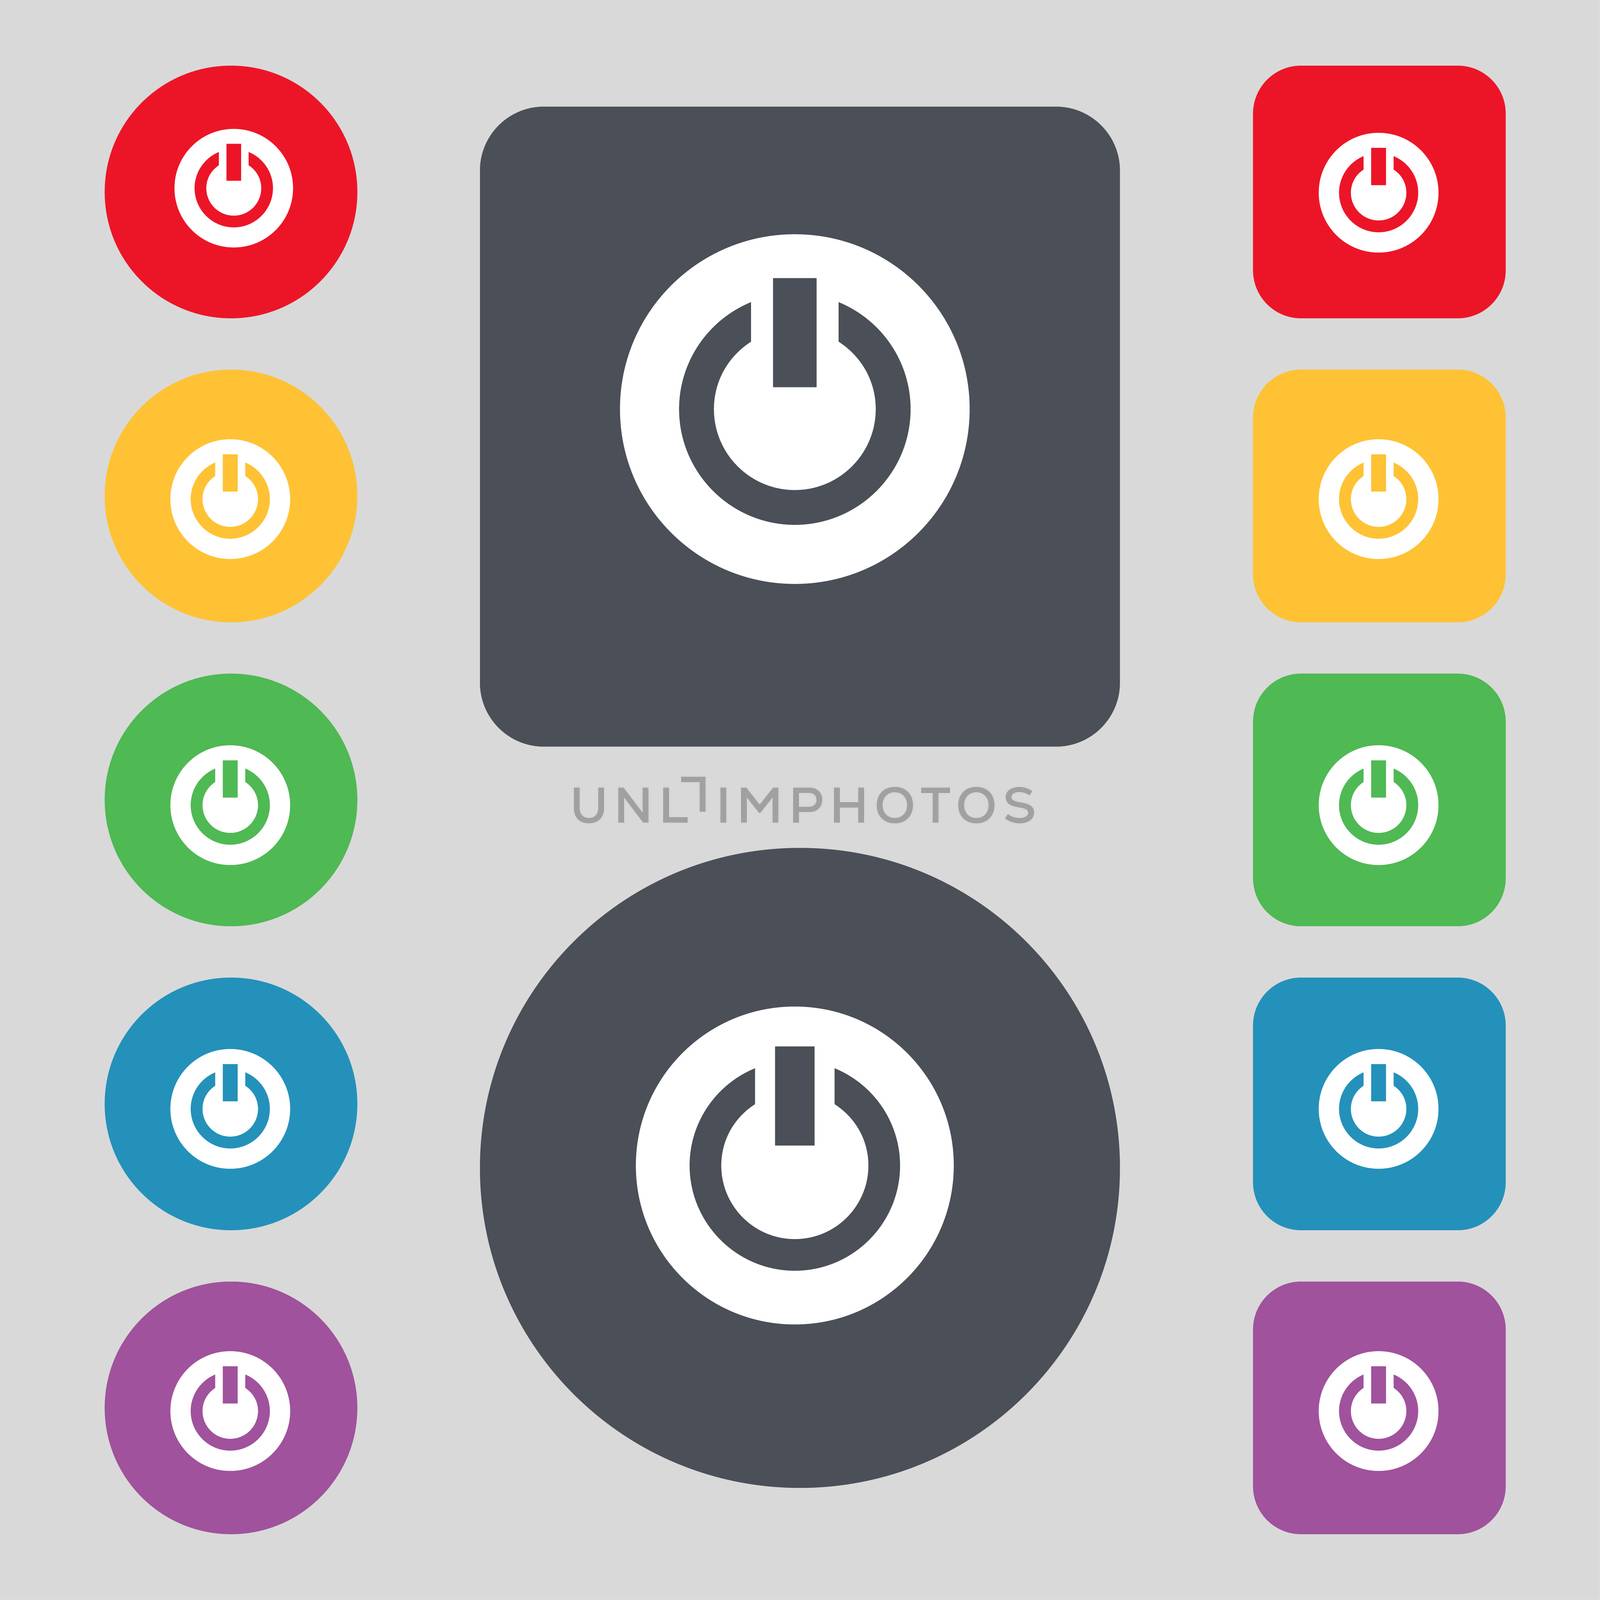 Power, Switch on, Turn on icon sign. A set of 12 colored buttons. Flat design. illustration